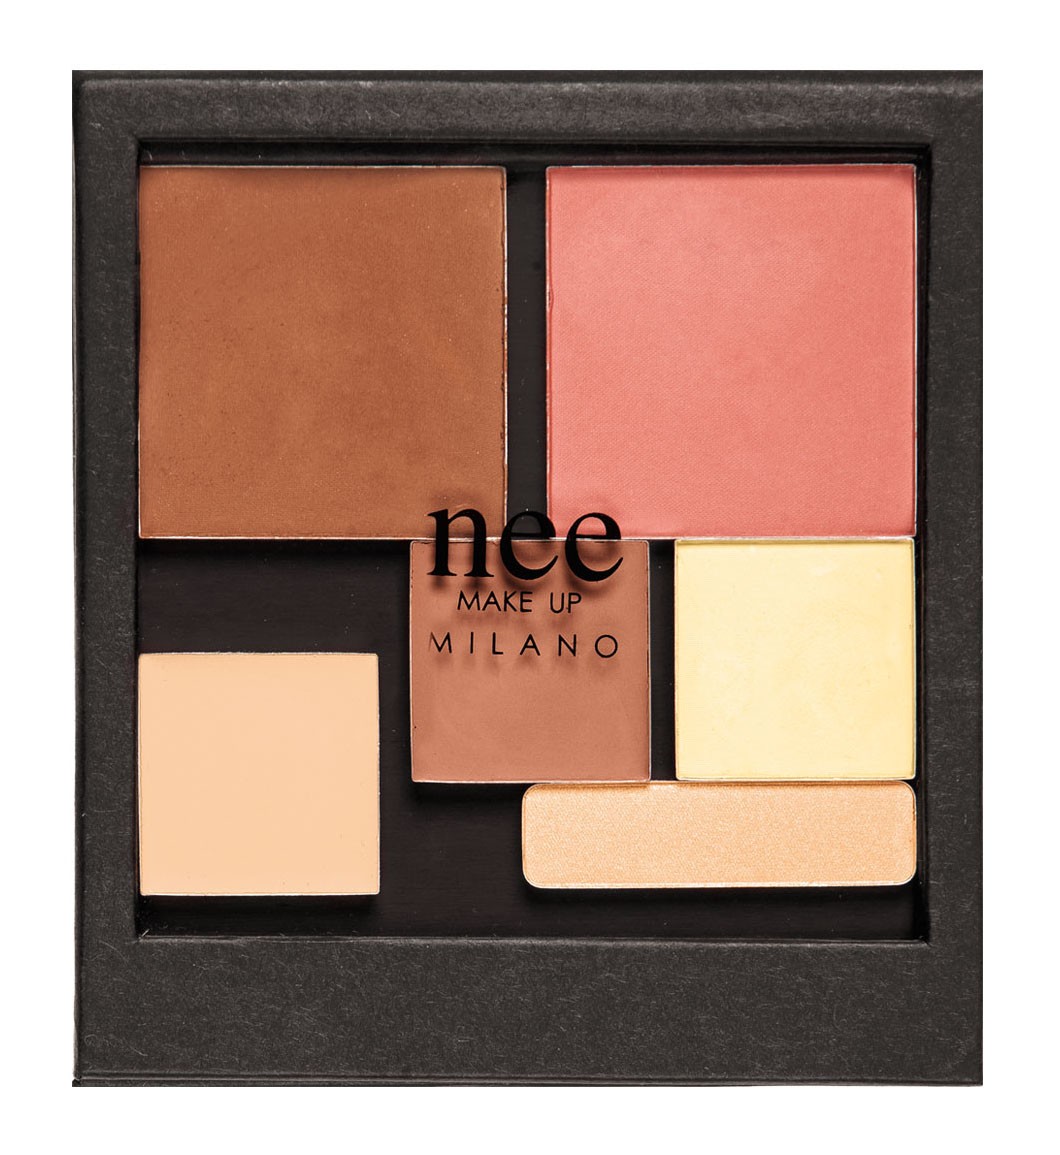 Nee Make Up - Milano - Trousse All Over - Face - Eyes - Palette